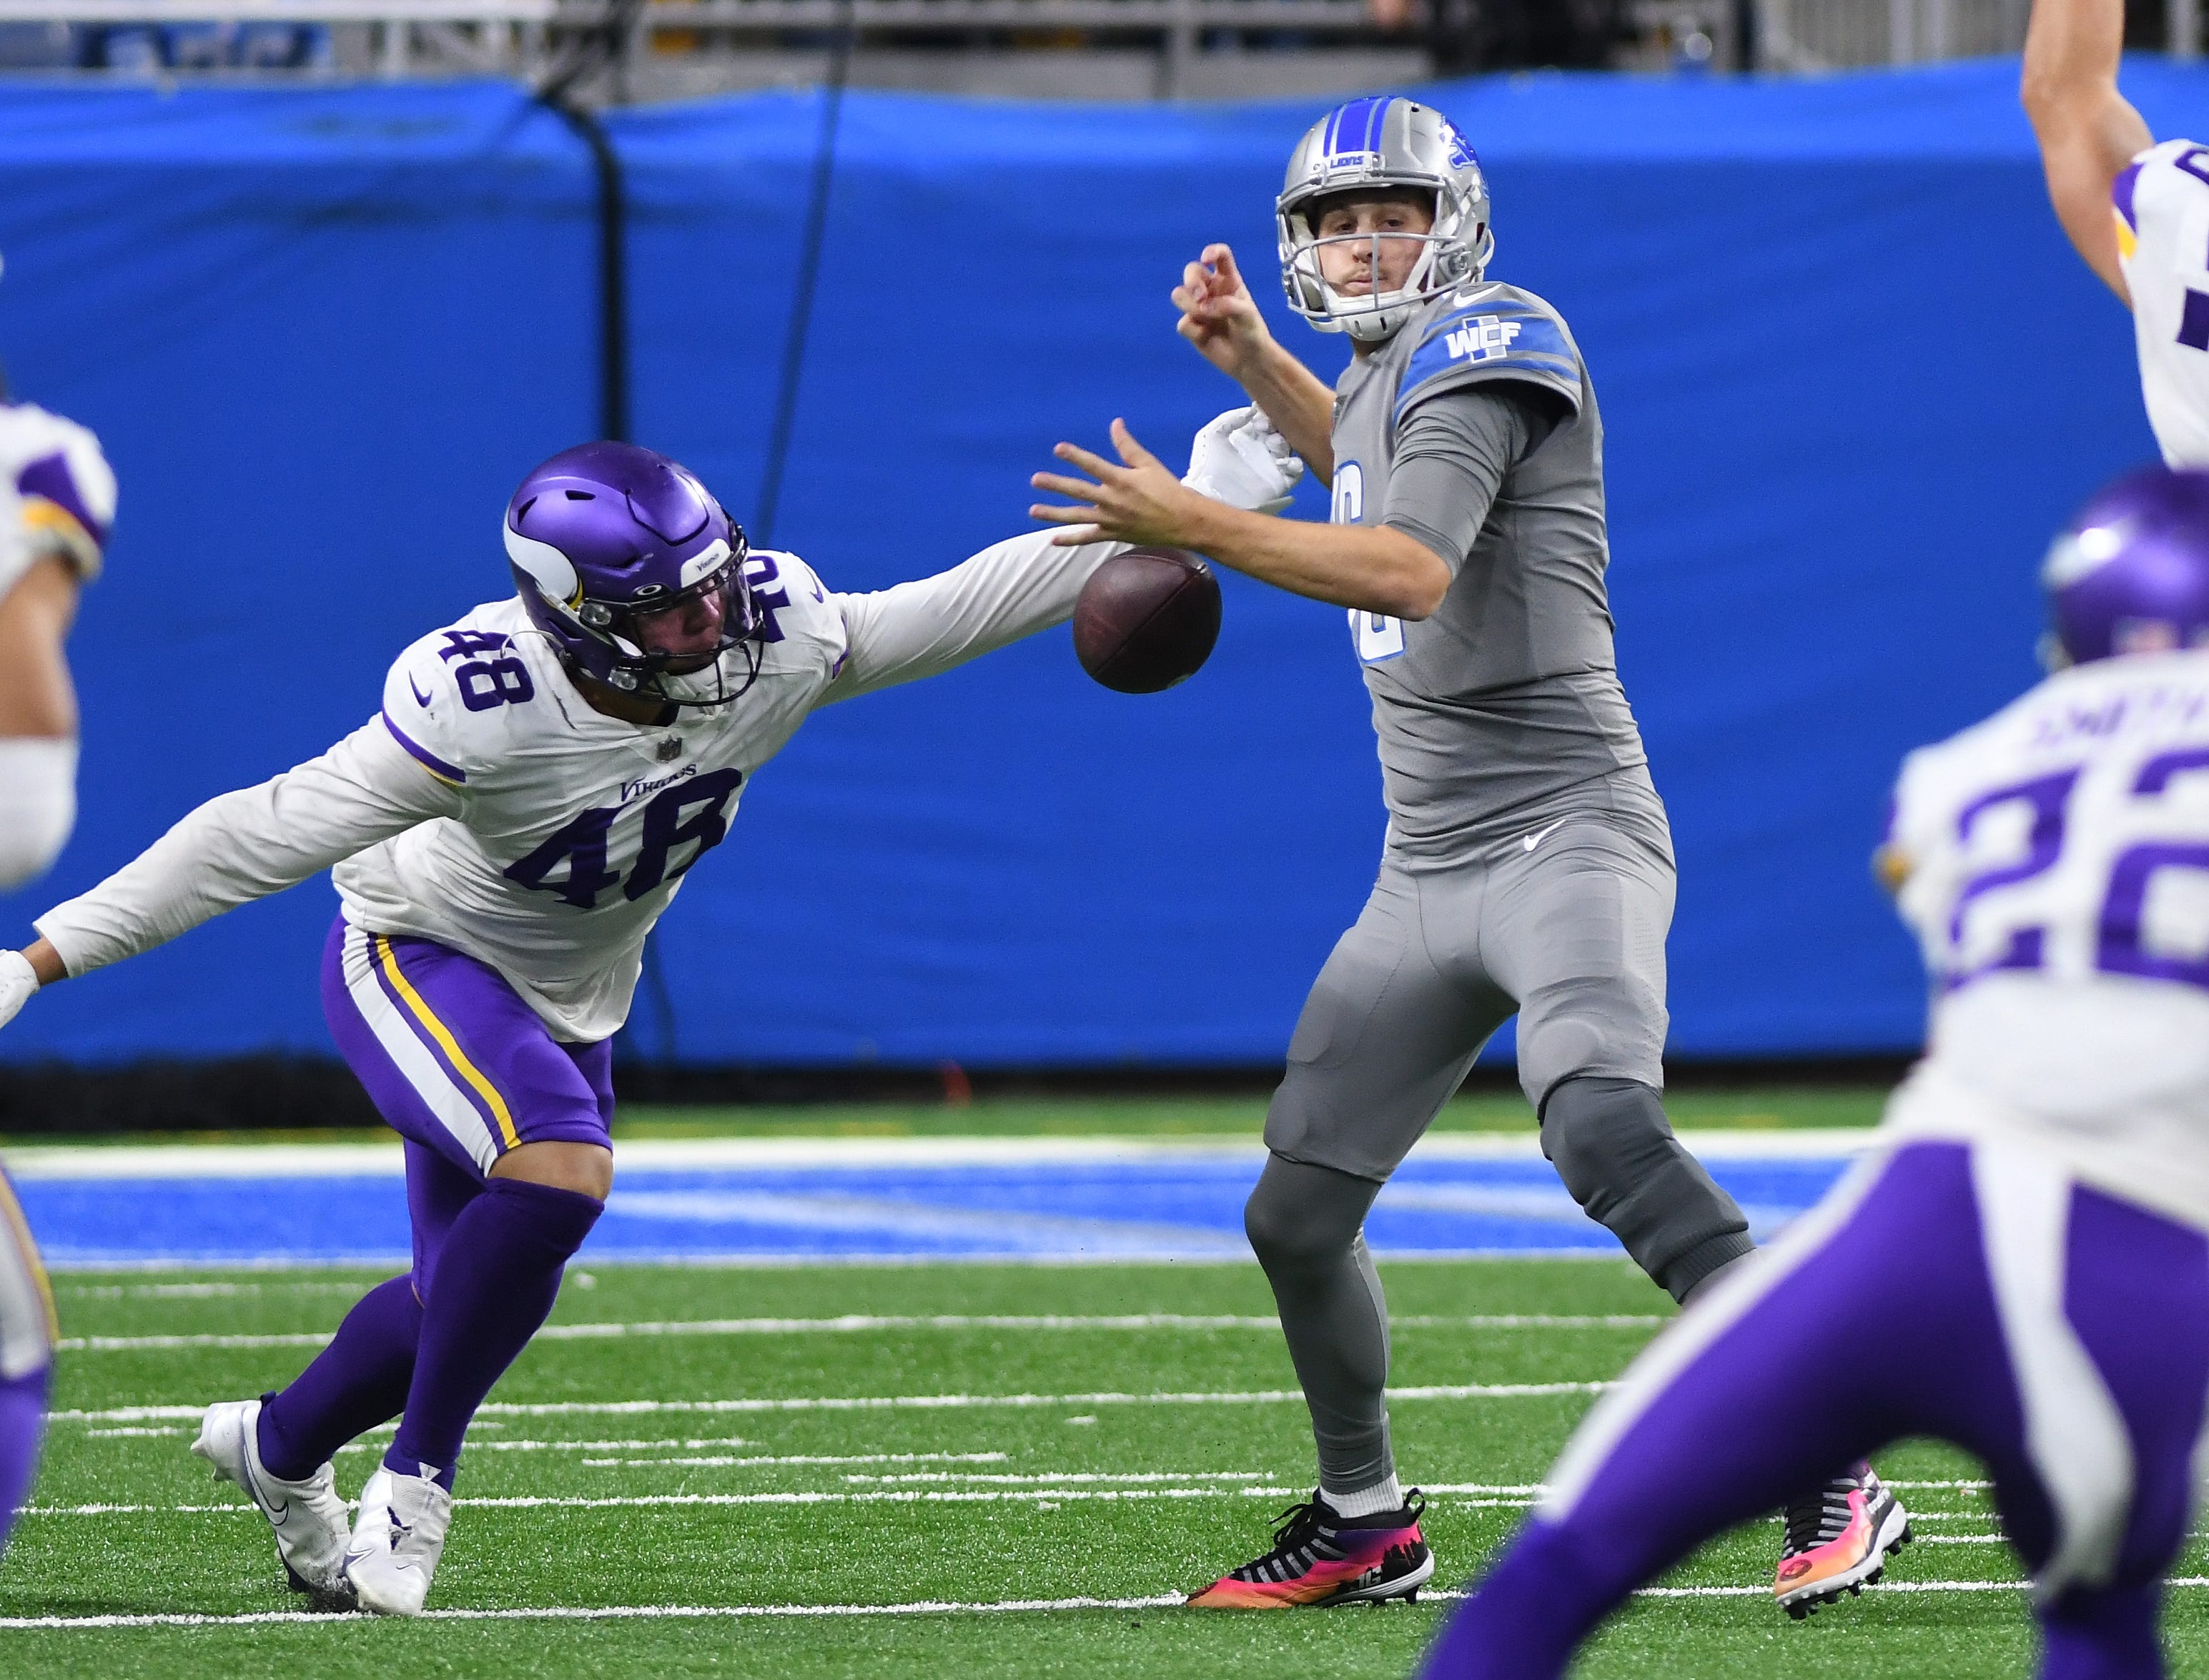 Vikings' Blake Lynch causes the fumble, which the Vikings recover, by Lions quarterback Jared Goff in the fourth quarter.